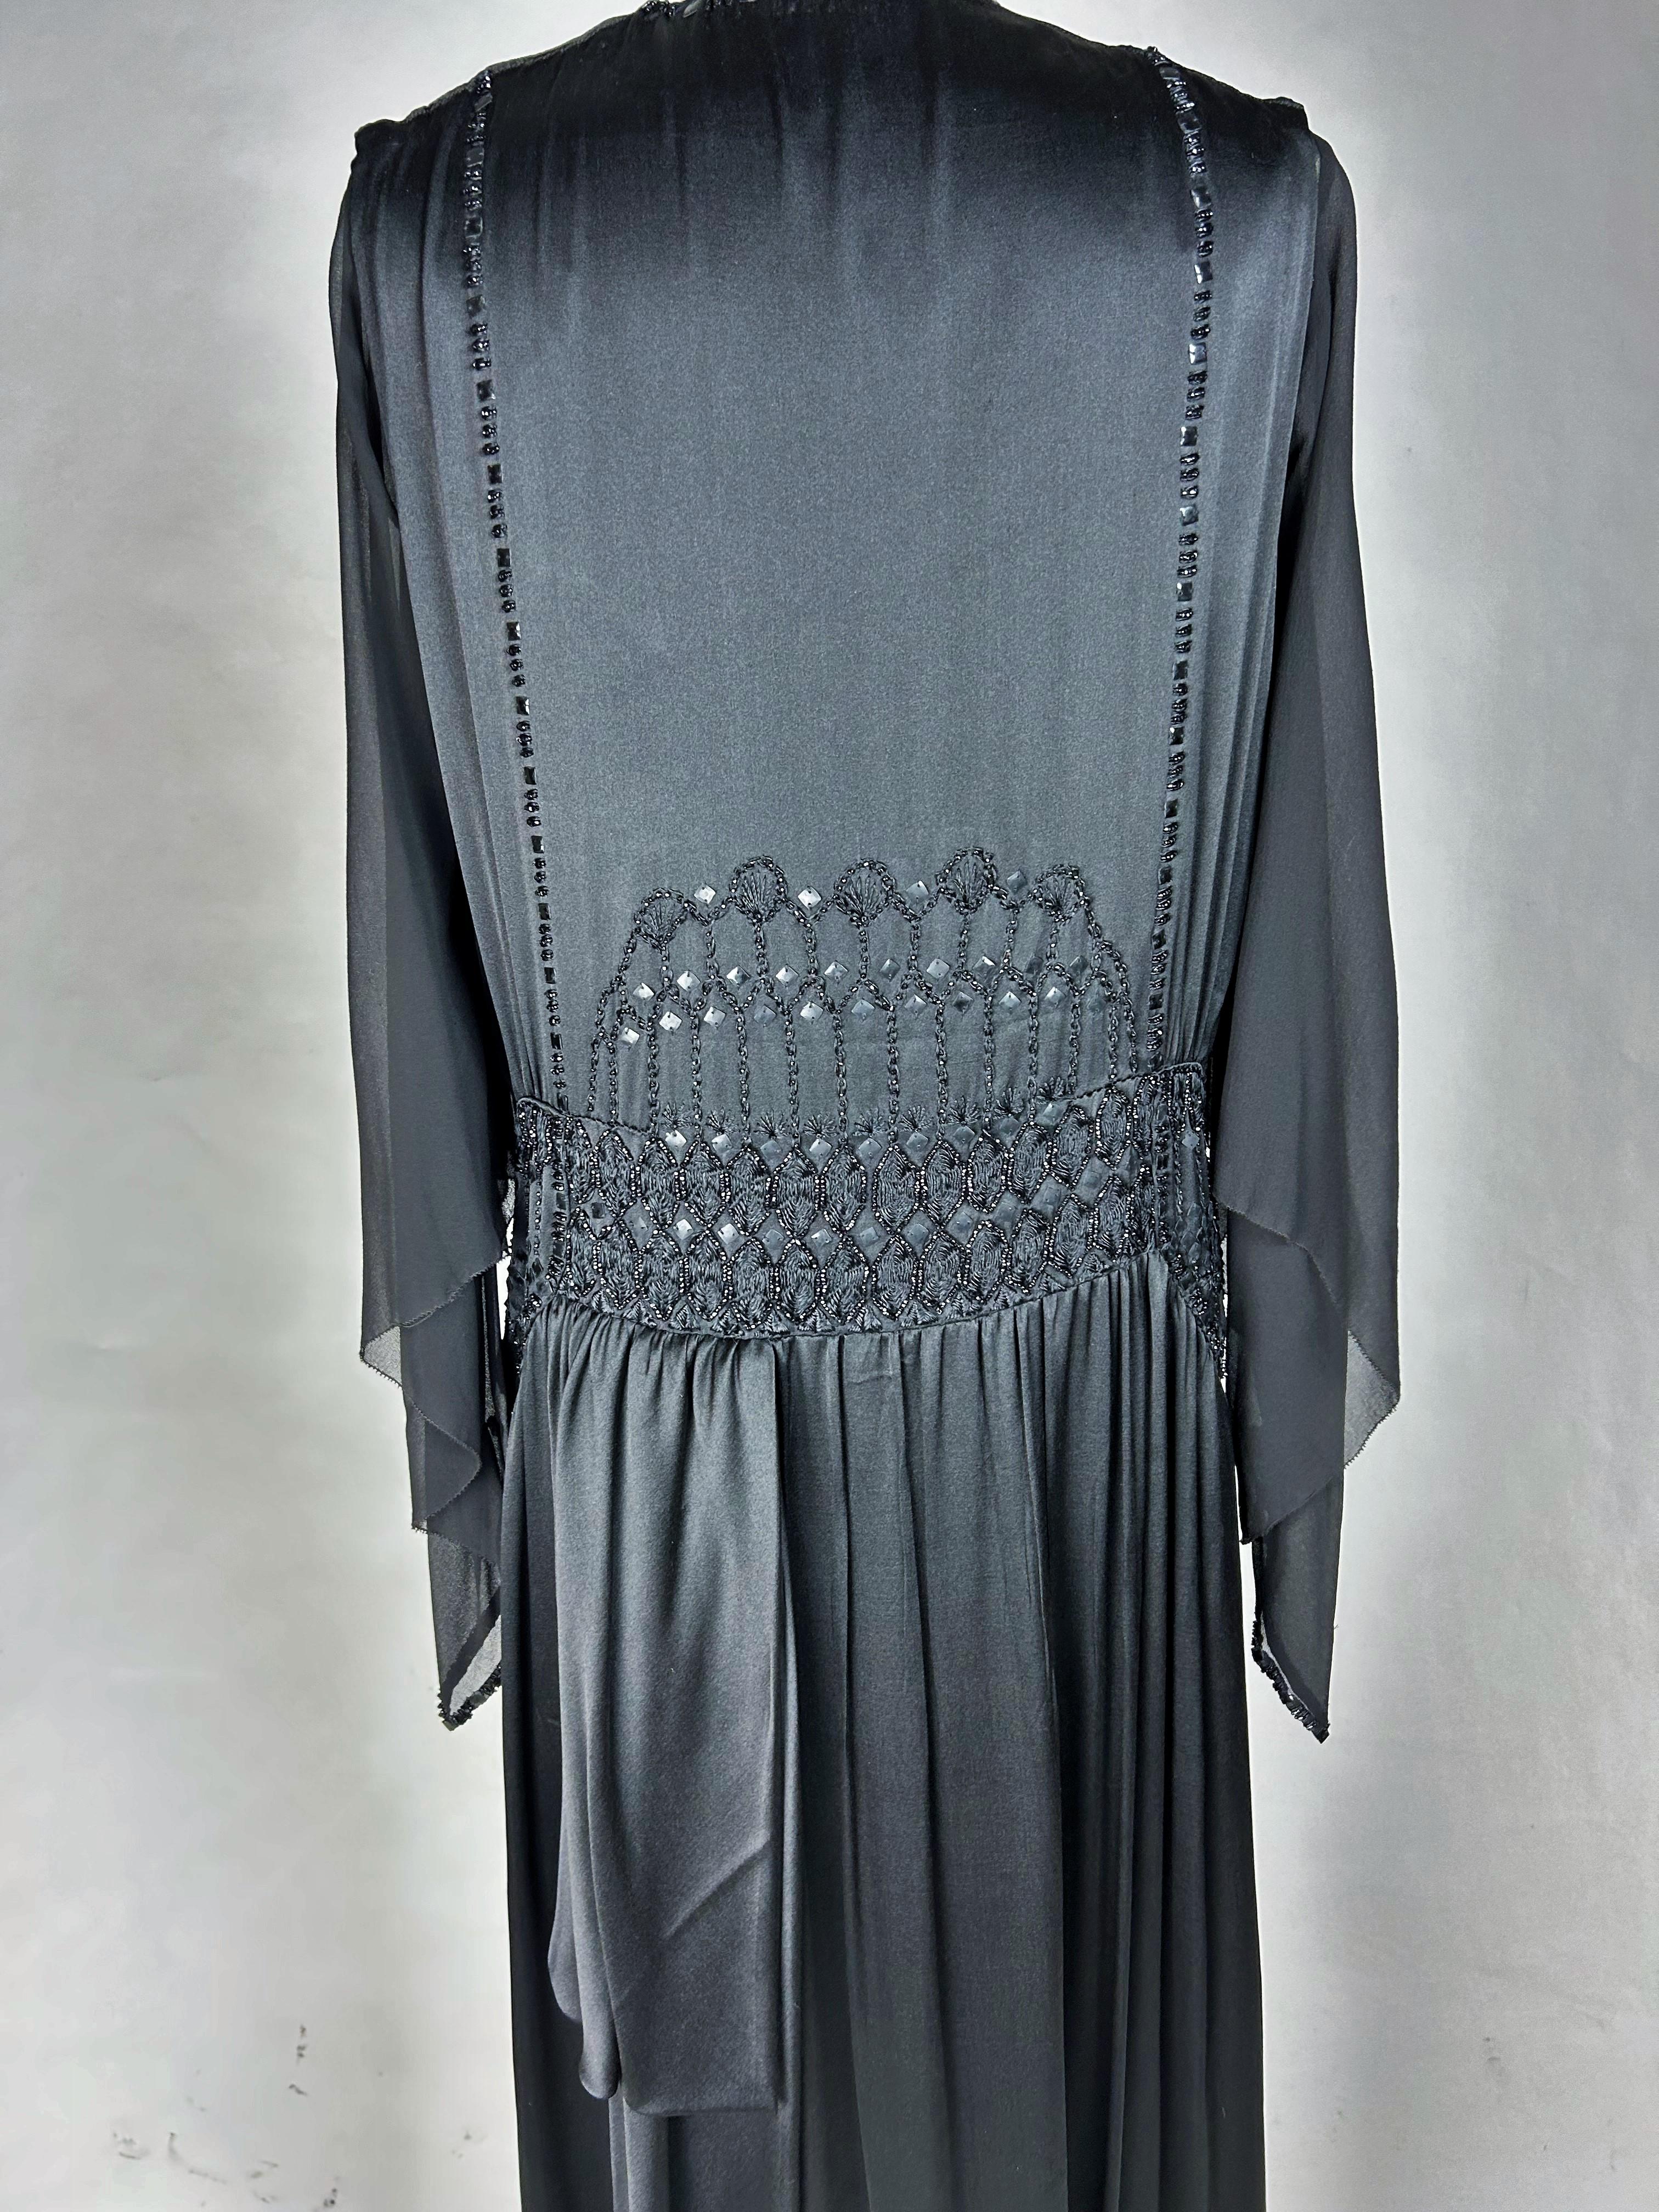 Long evening dress in embroidered satin and chiffon - Paris Circa 1920 For Sale 7